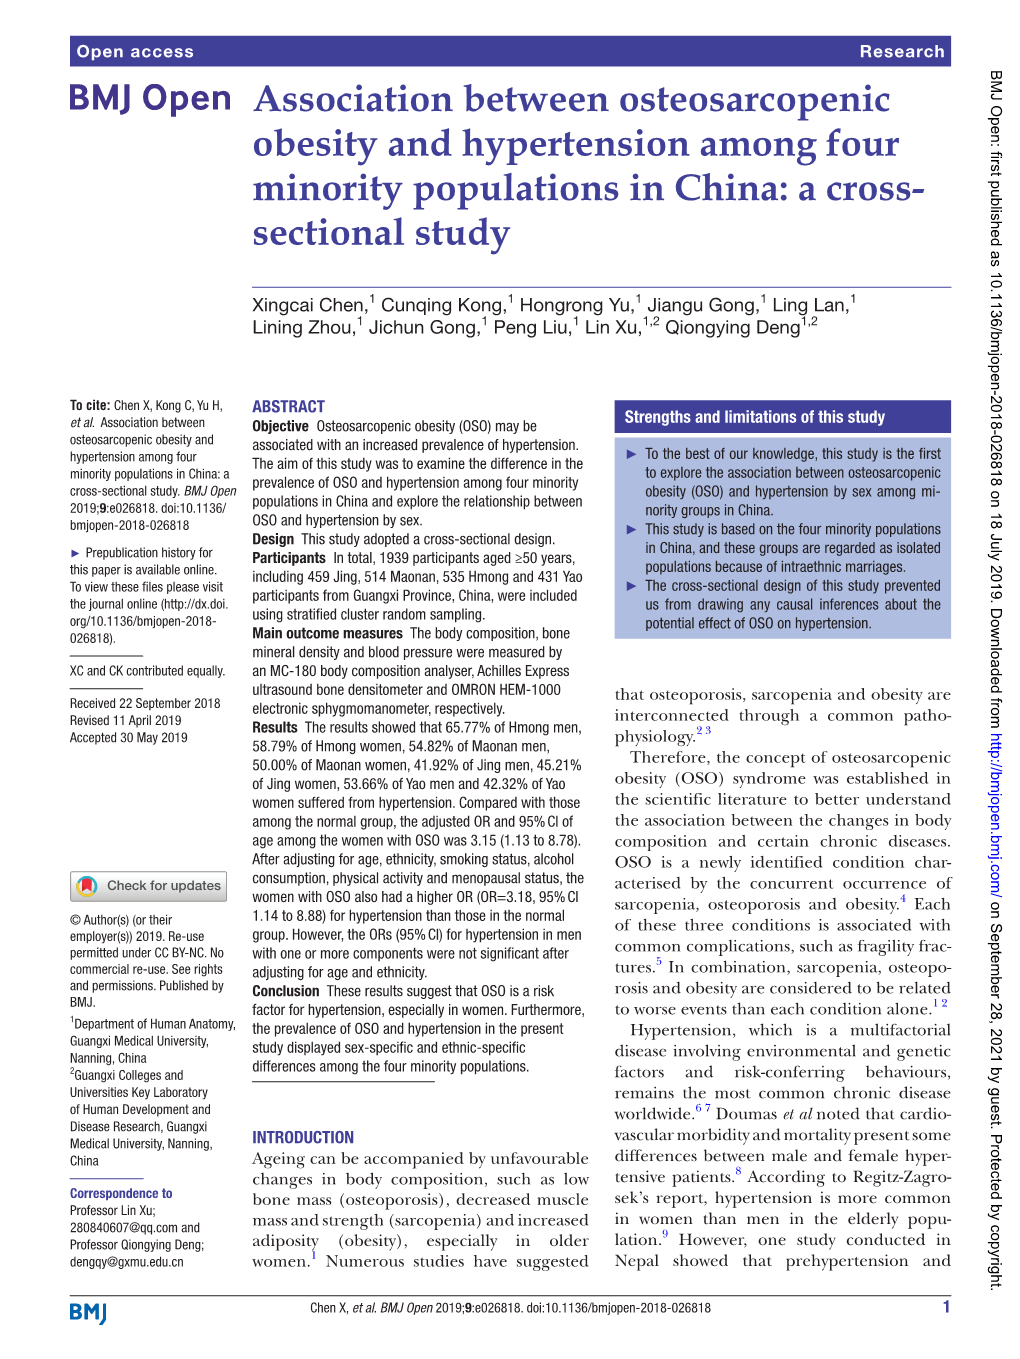 Association Between Osteosarcopenic Obesity and Hypertension Among Four Minority Populations in China: a Cross- Sectional Study